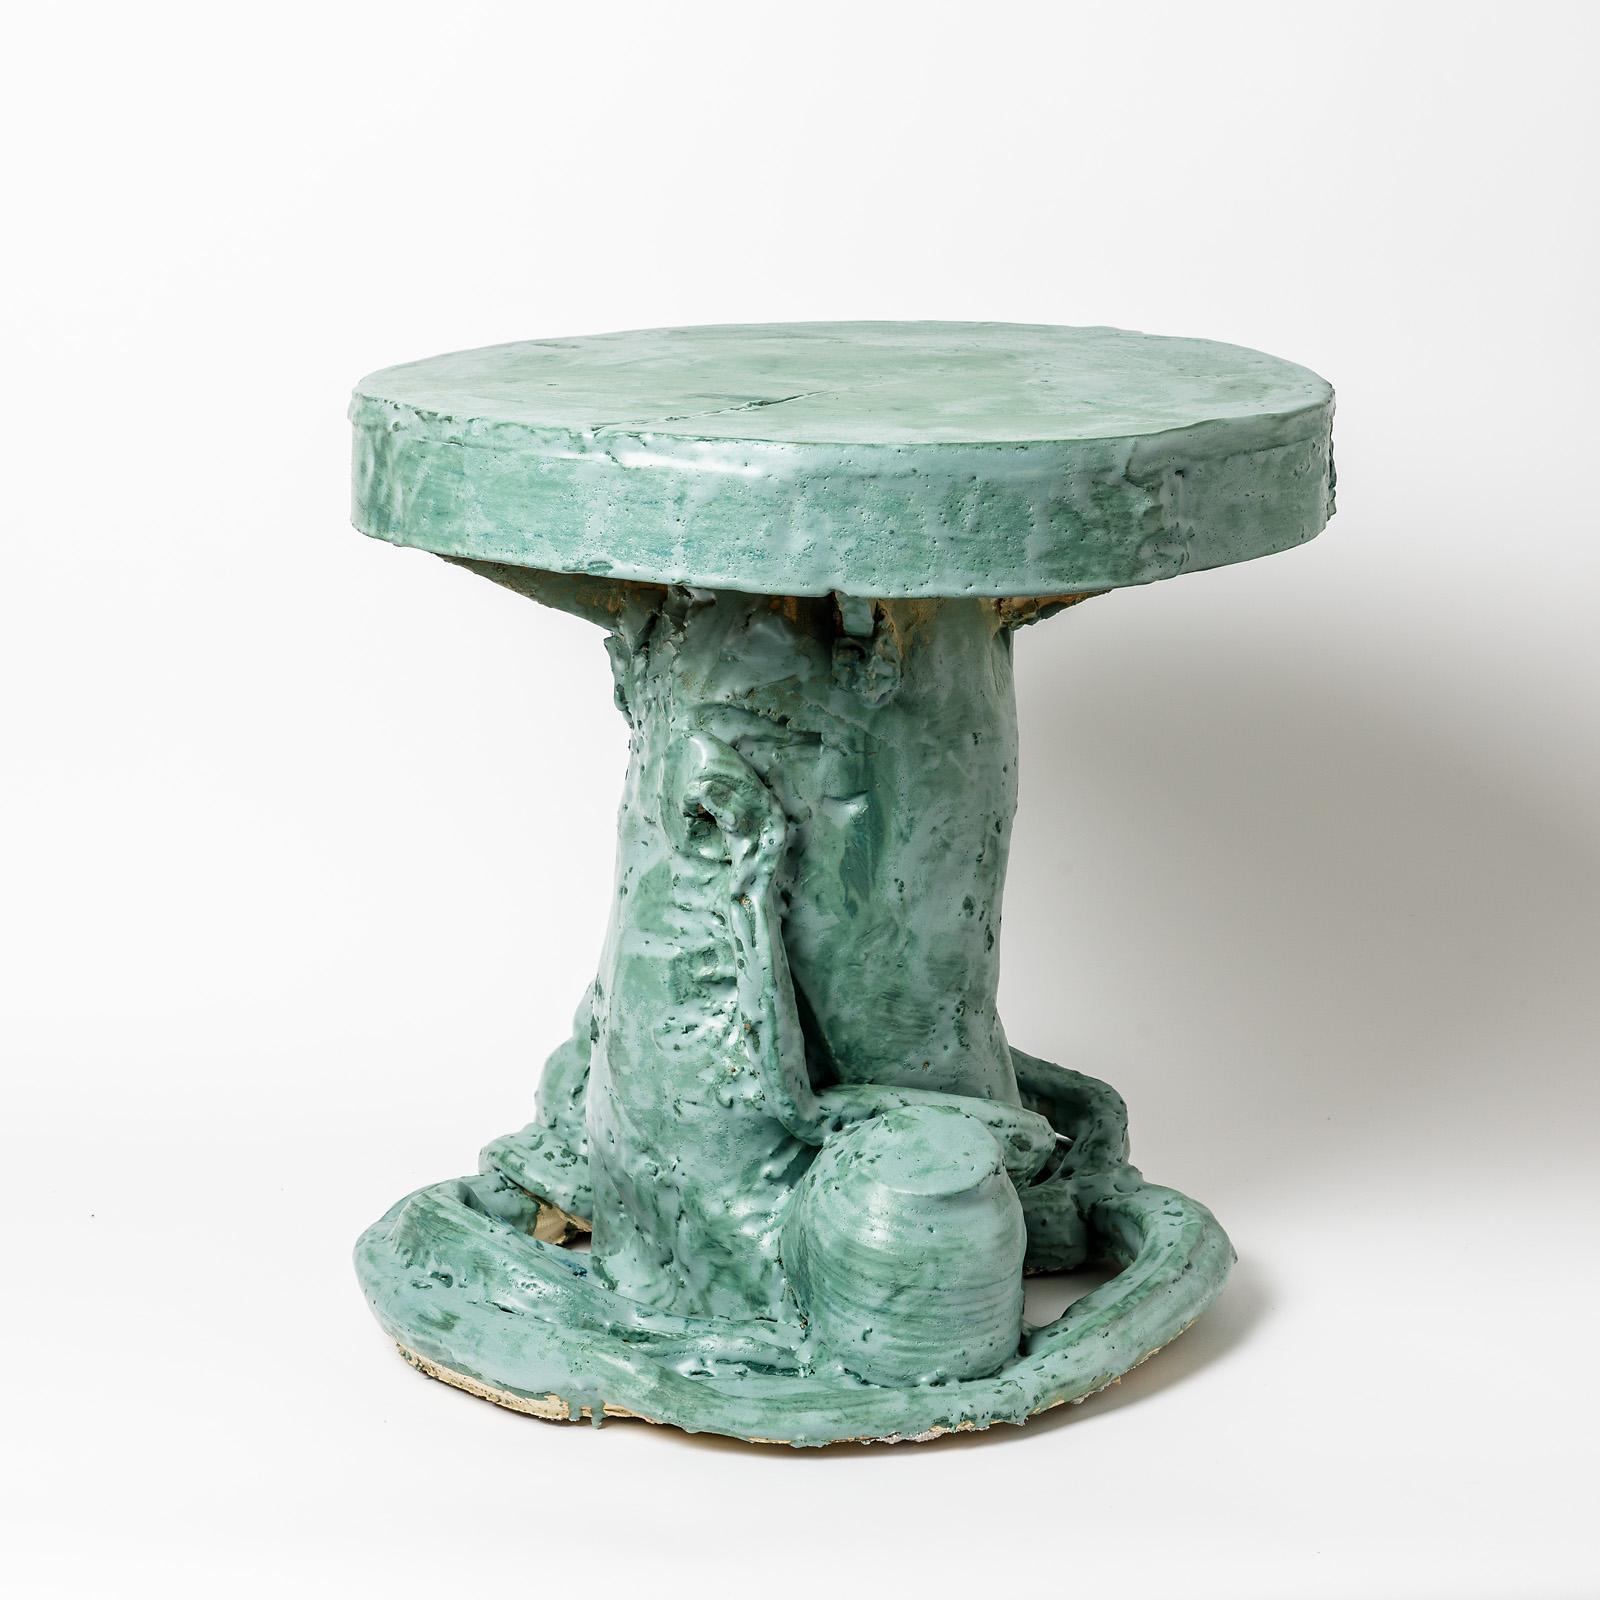 Beaux Arts Ceramic Table by Patrick Crulis with Green Glaze Decoration, France, 2021 For Sale